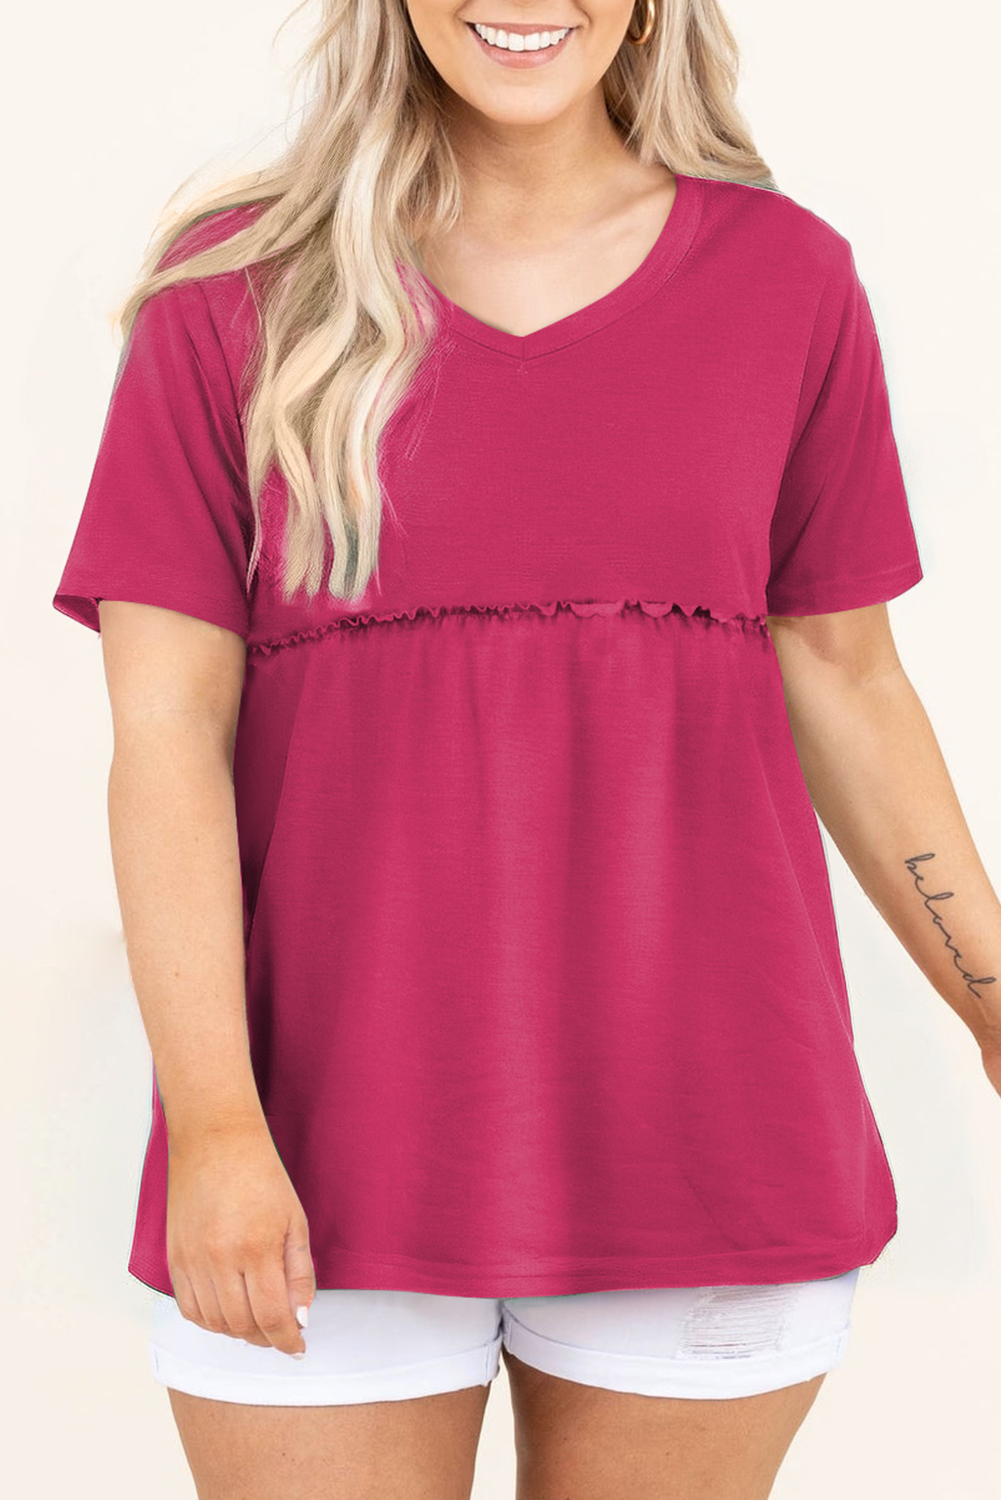 Rose Red Solid Color SHORT Sleeve Flowy Plus Size Top